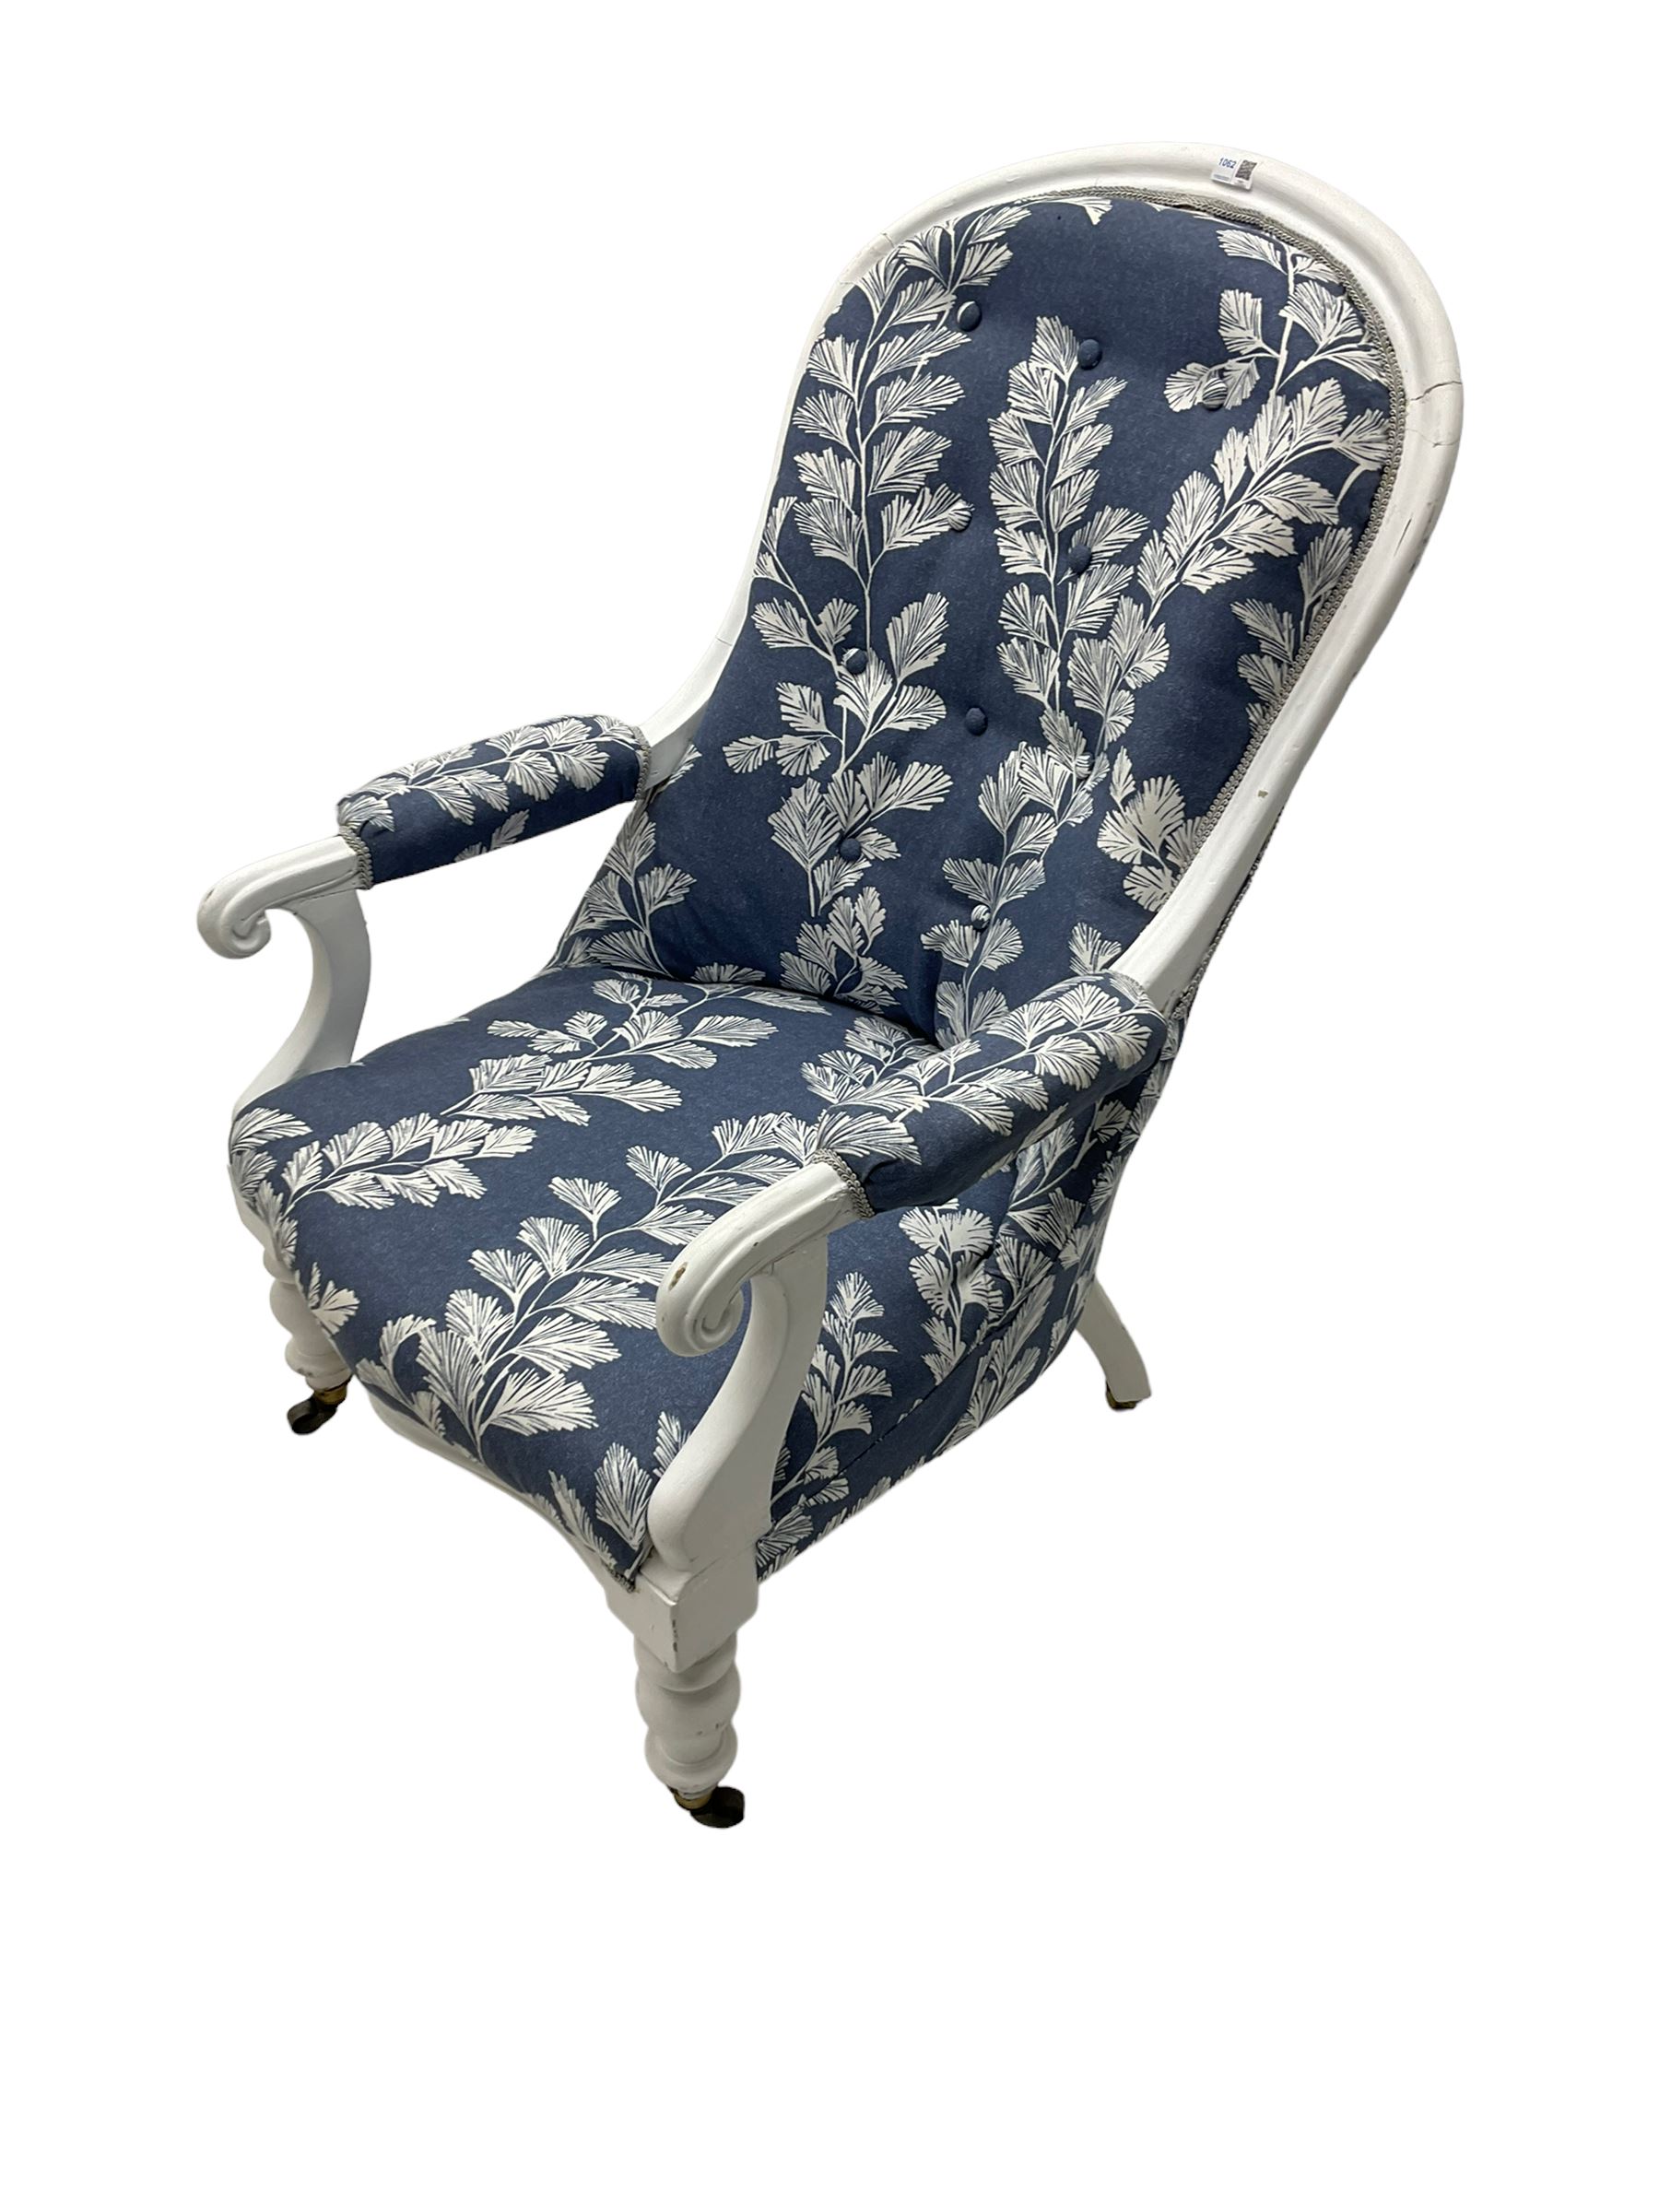 Late 19th century white painted armchair - Image 5 of 6